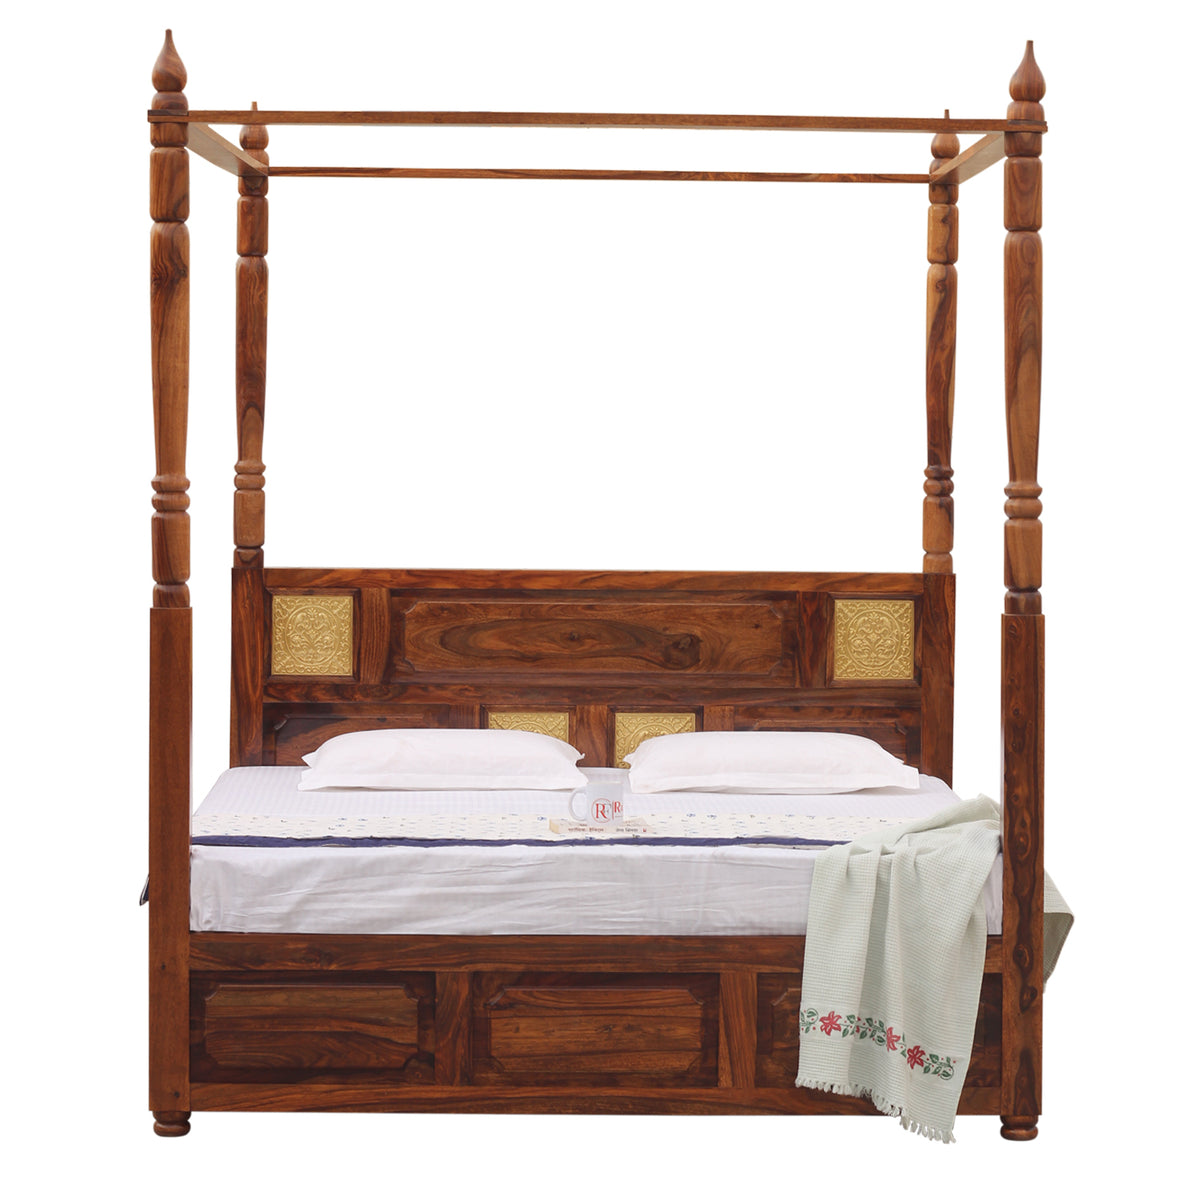 Solid Sheesham Wood King Size Four Poster Bed with Box Storage in Natural Finish